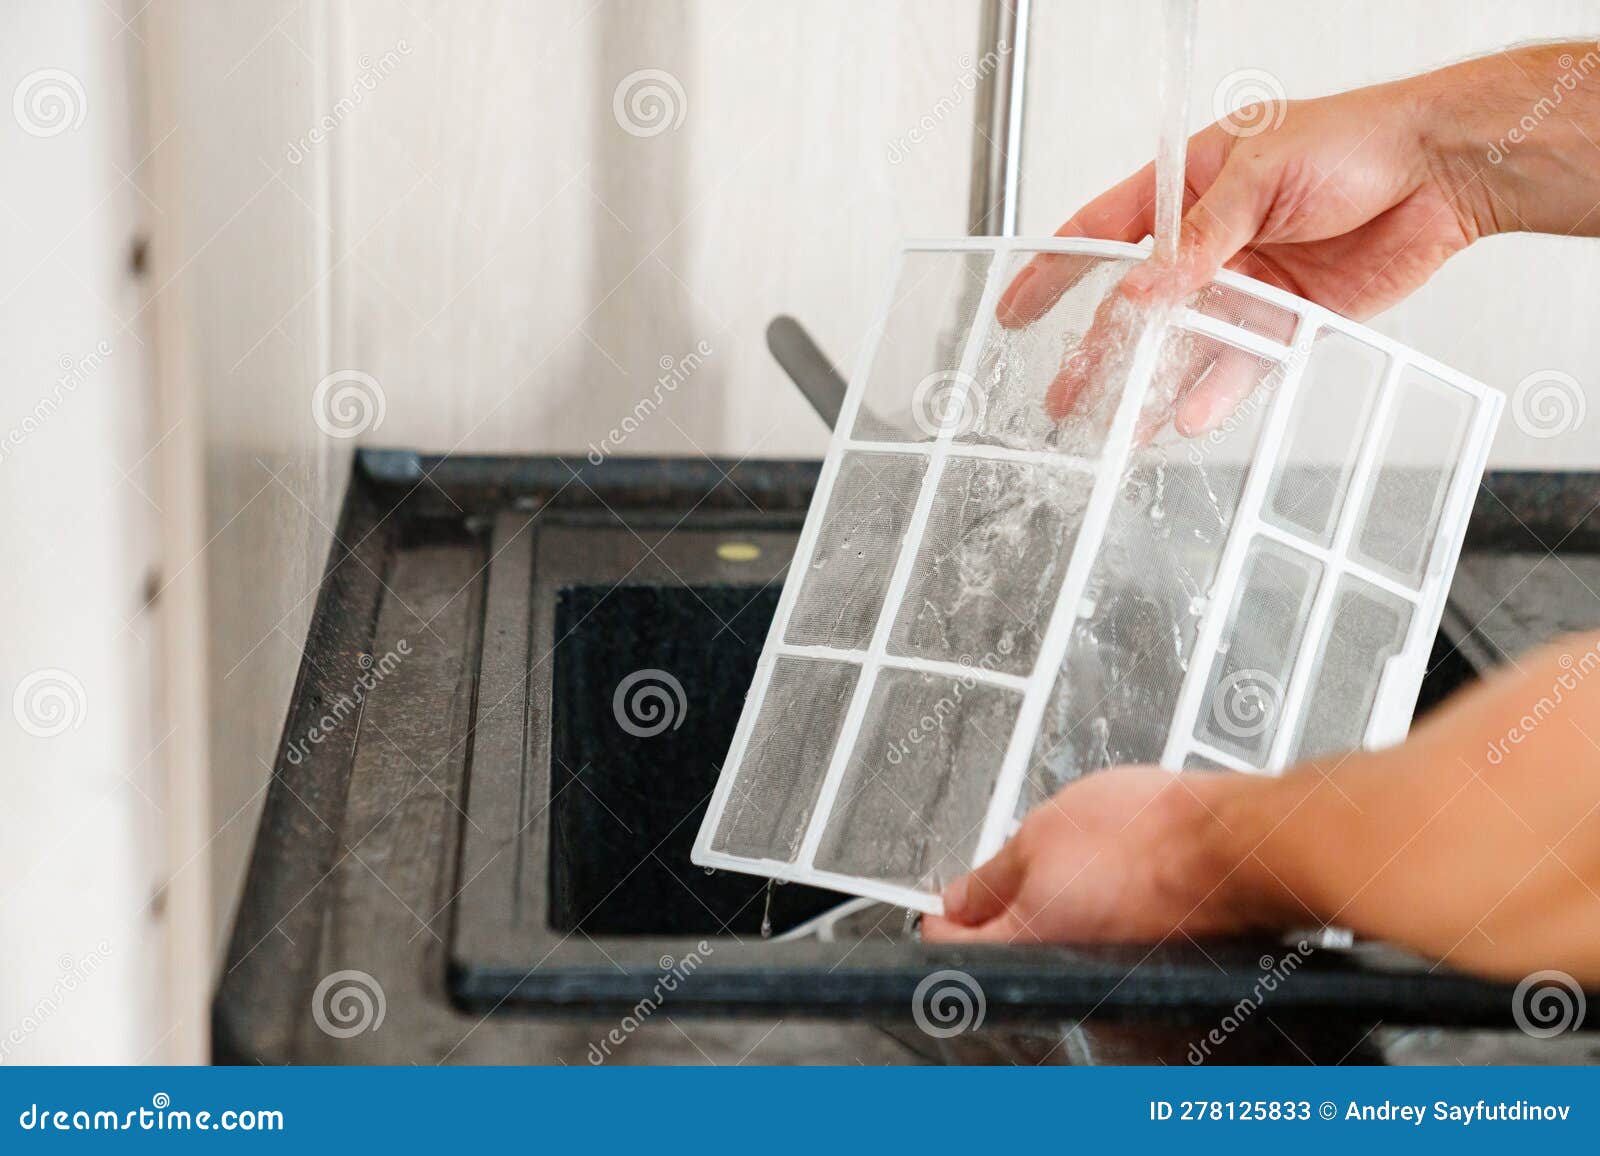 a man flushes the air cleaner filter from the air conditioner.